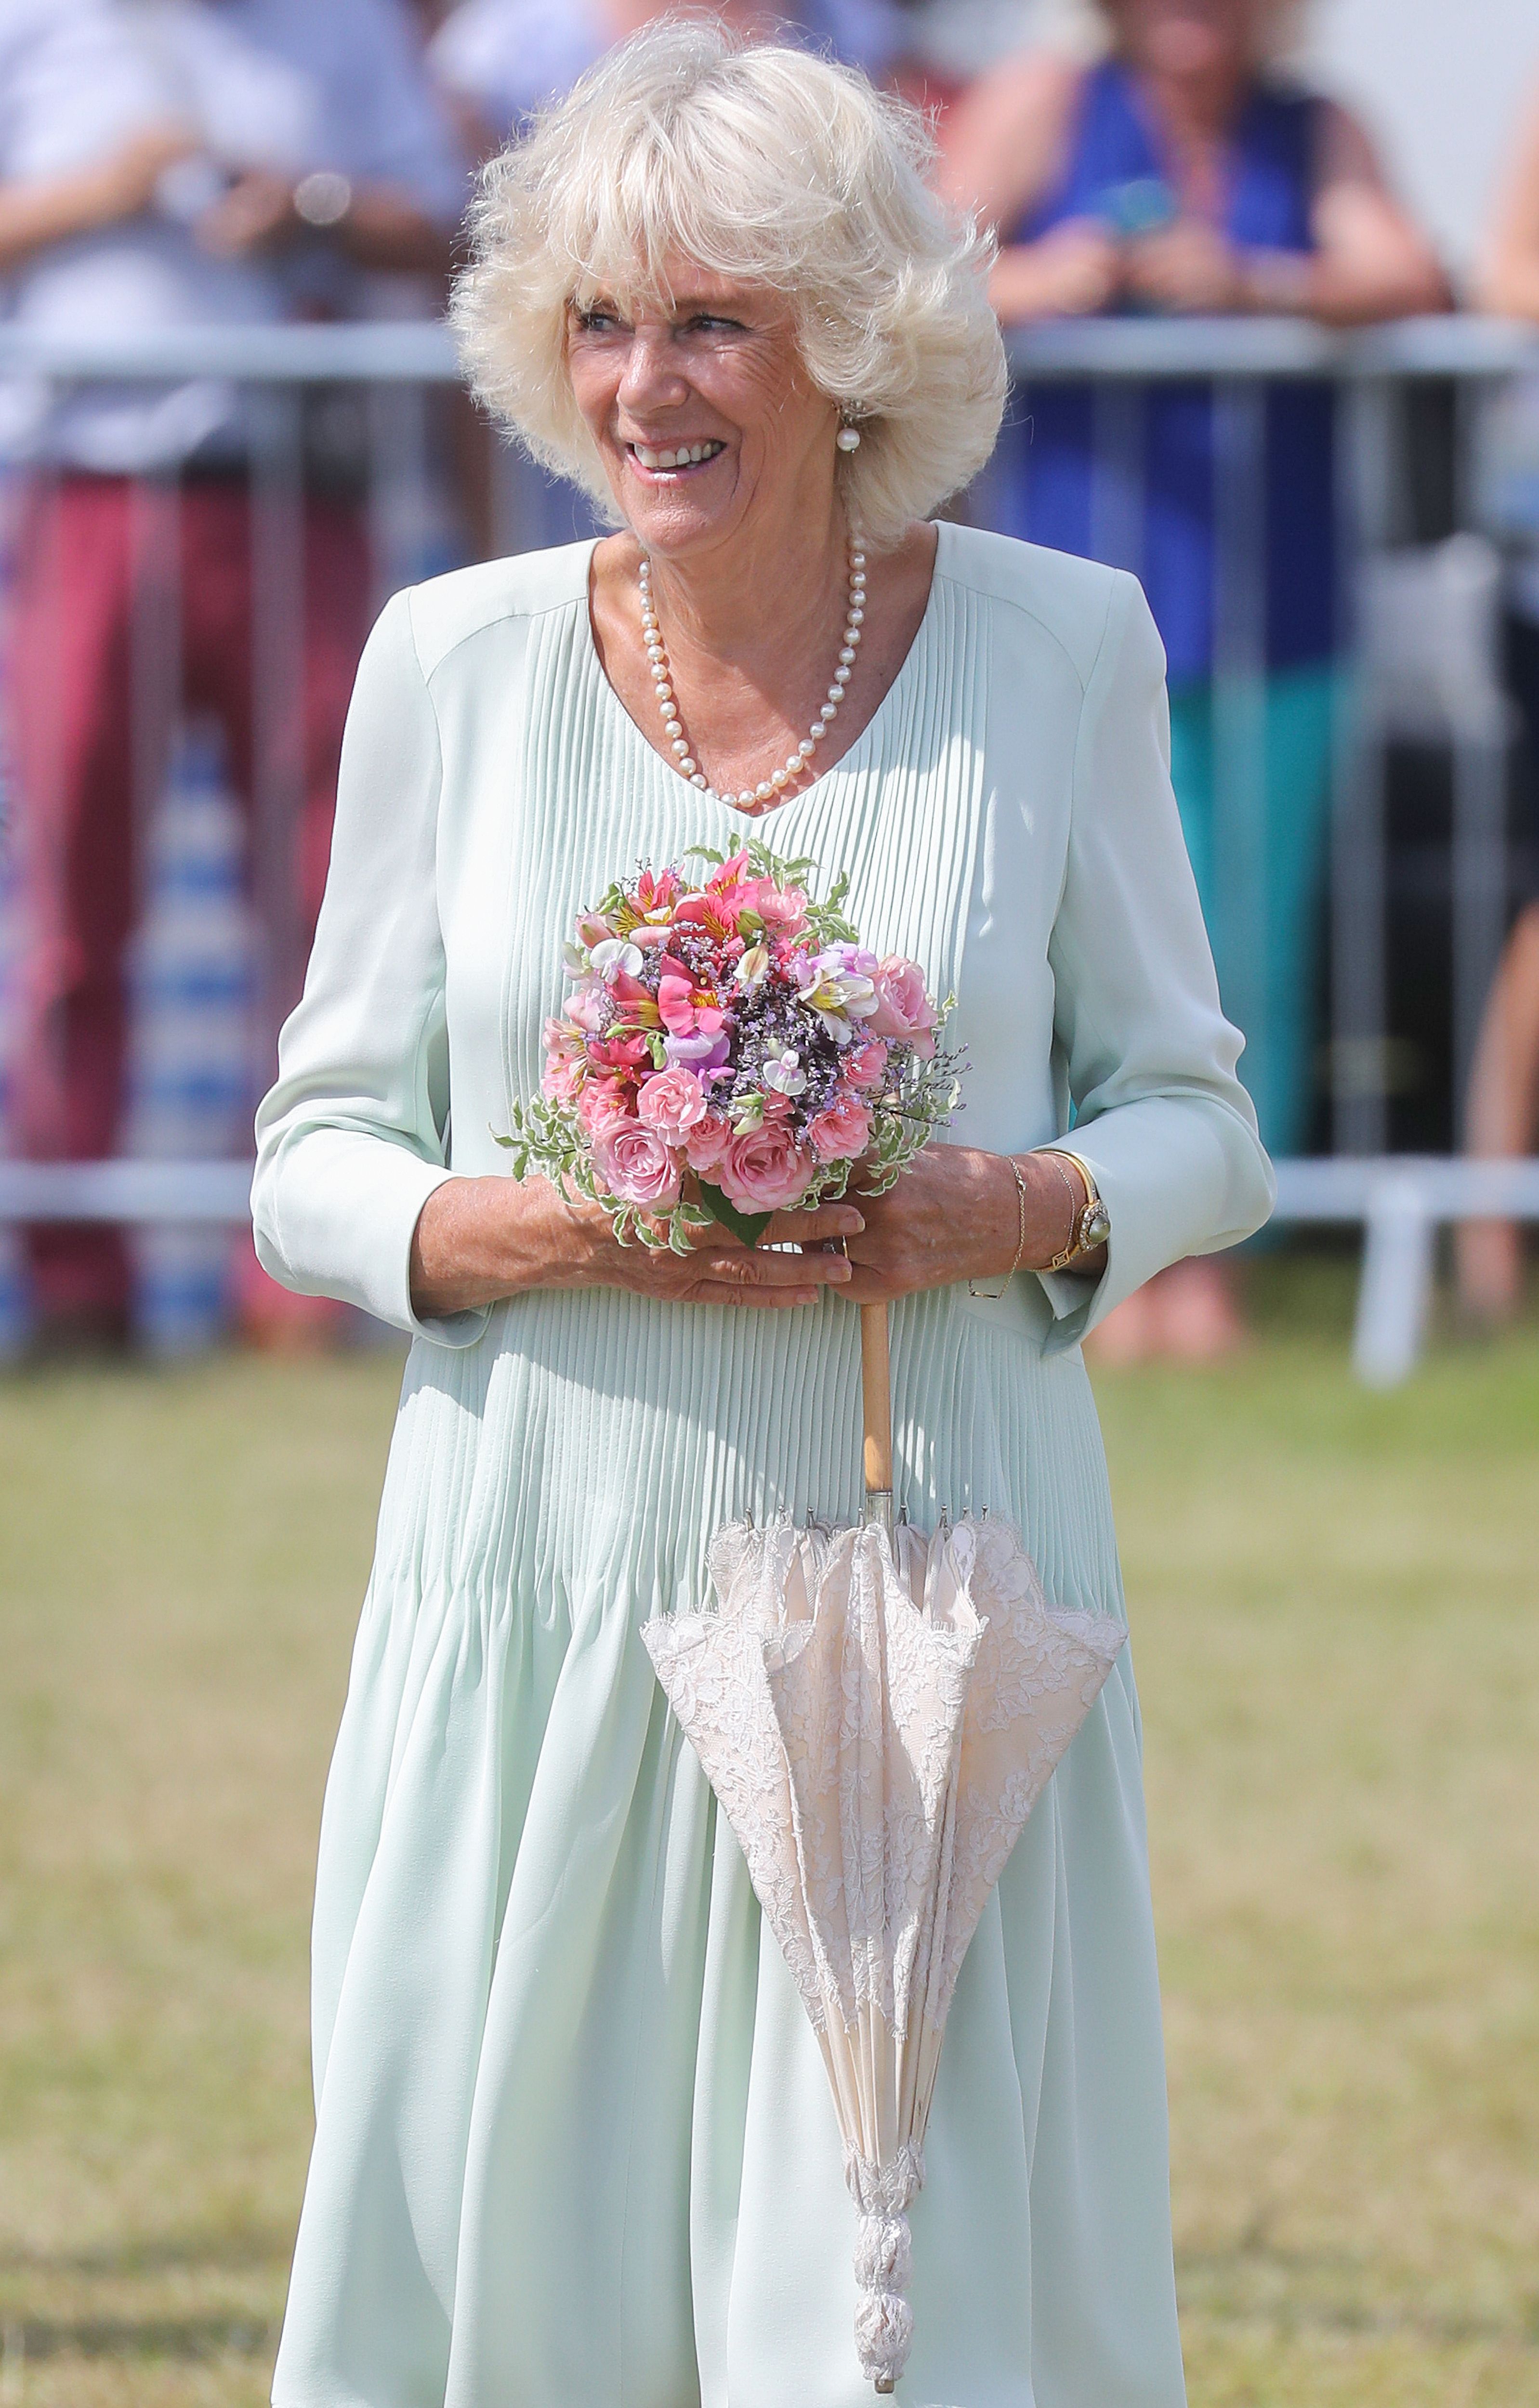 Camilla, Duchess of Cornwall at Sandringham House on July 24, 2019 | Photo: Getty Images